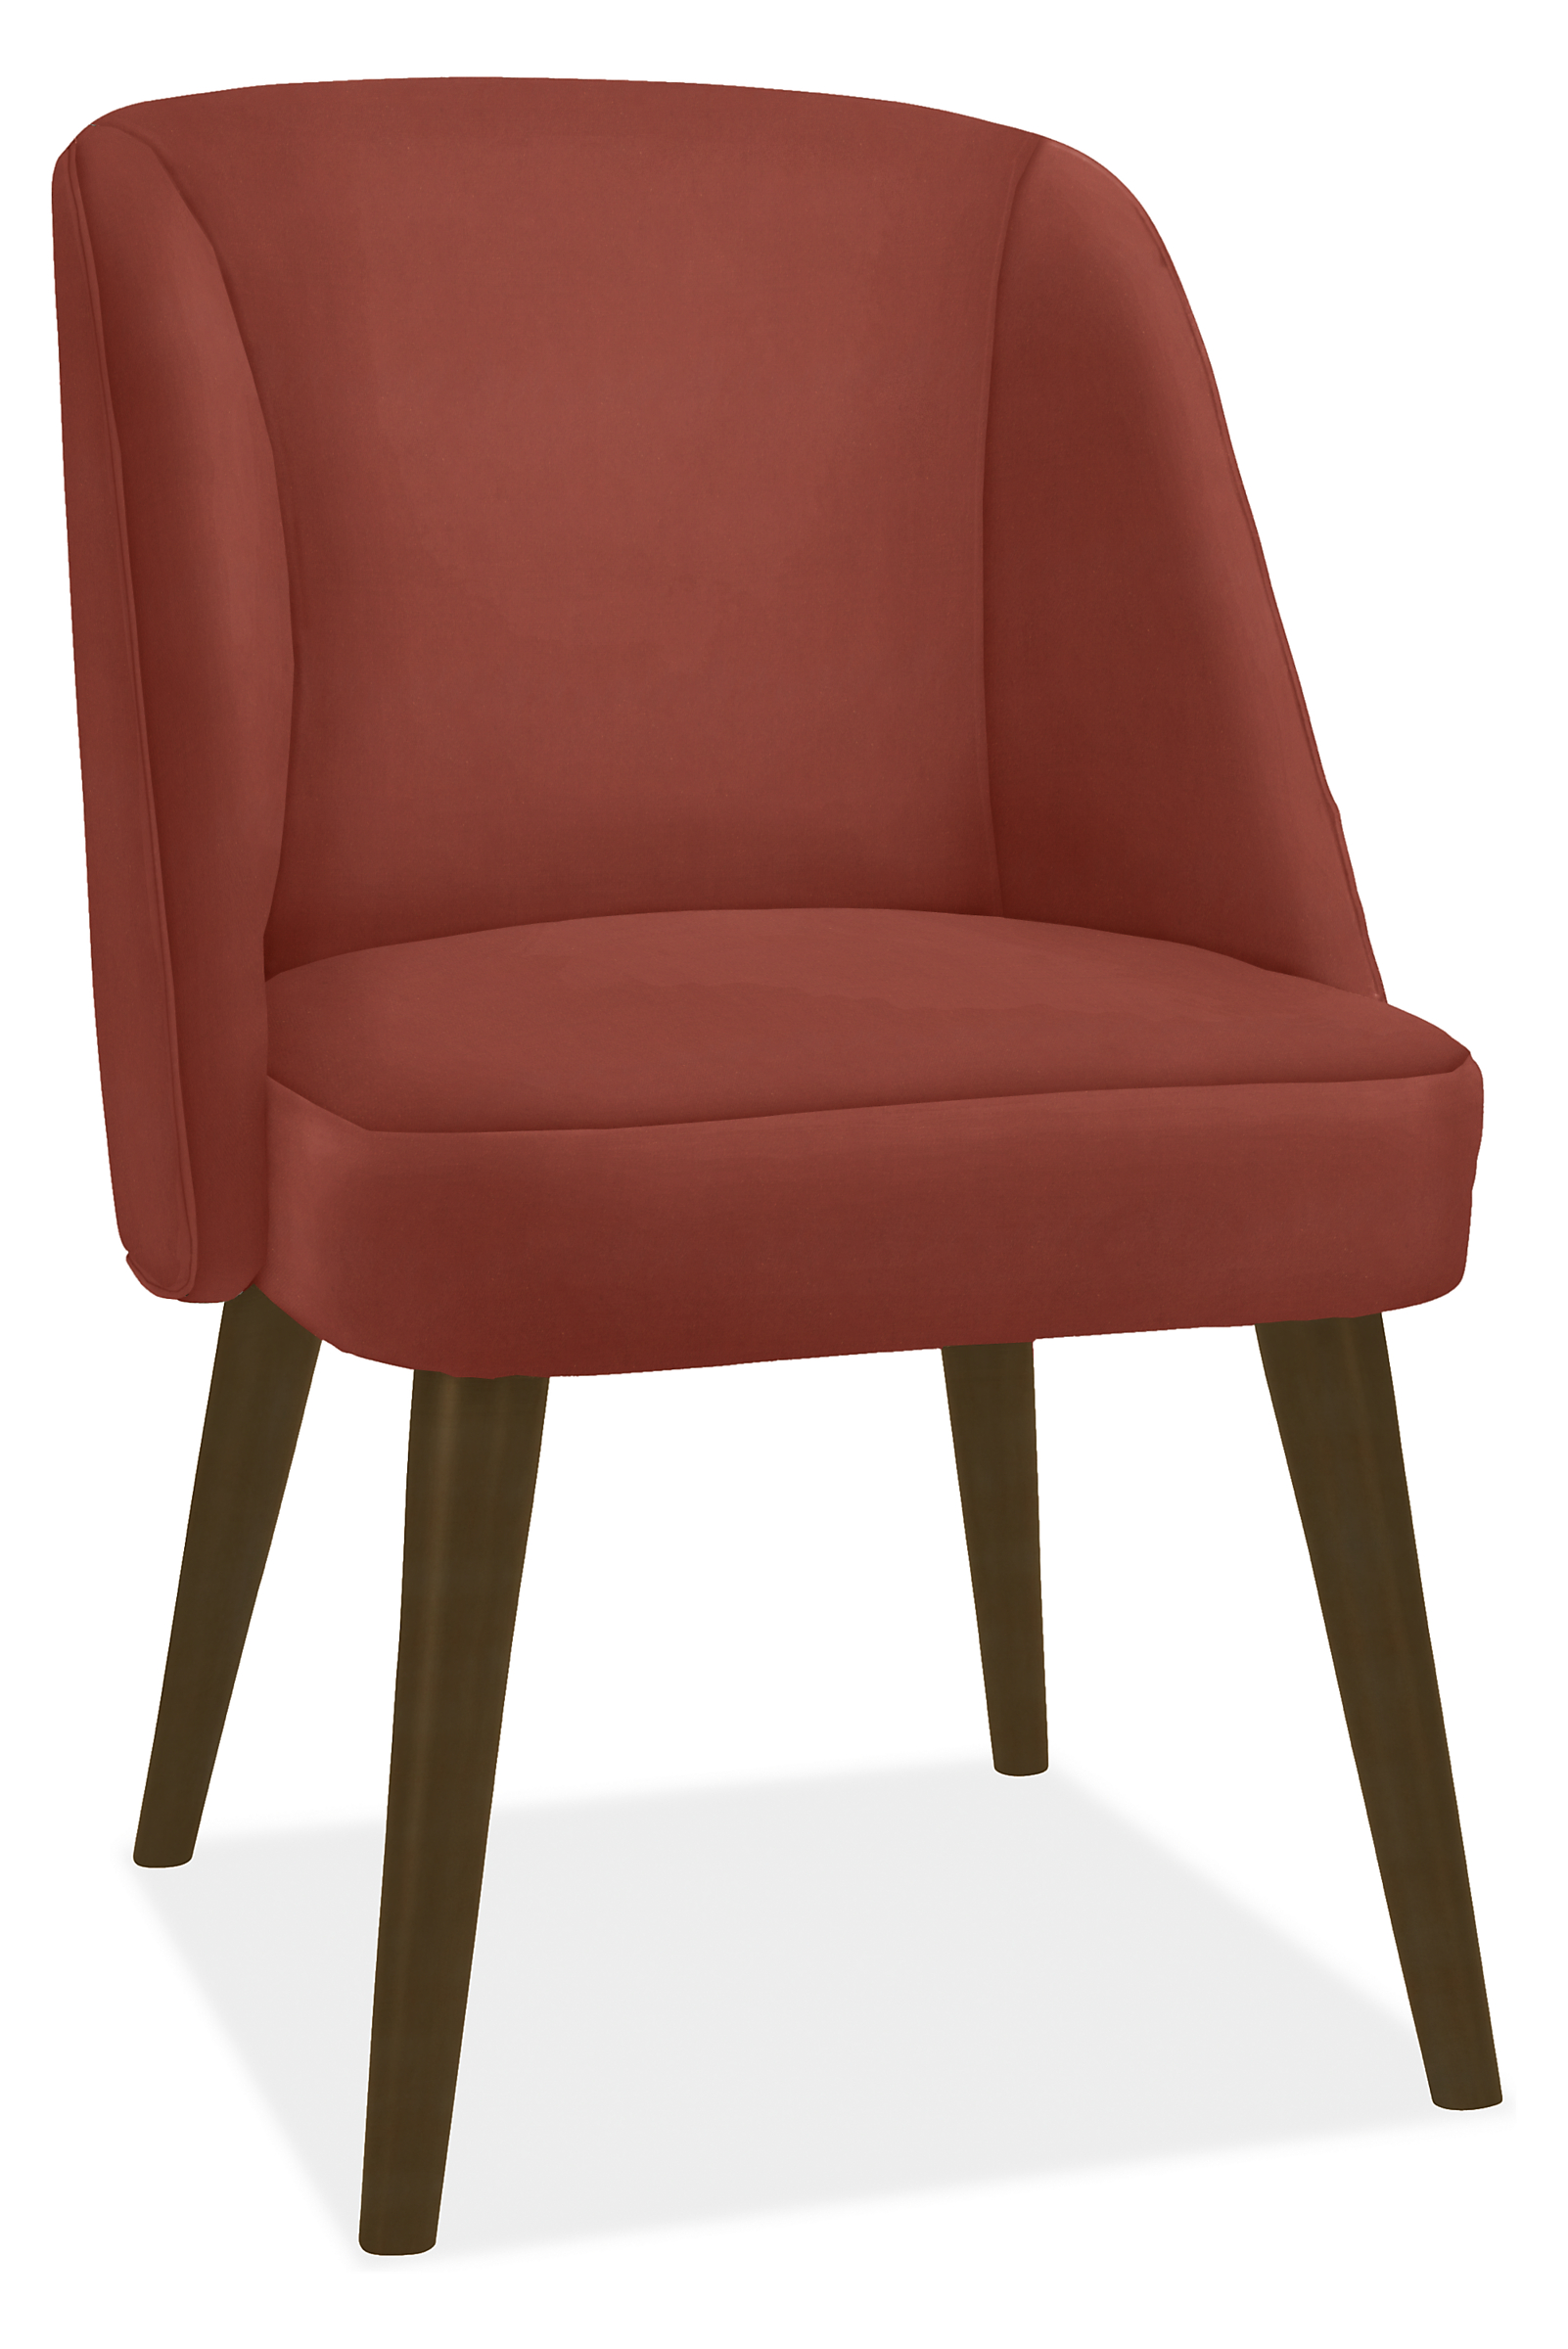 Cora Side Chair in Vance Paprika with Charcoal Legs